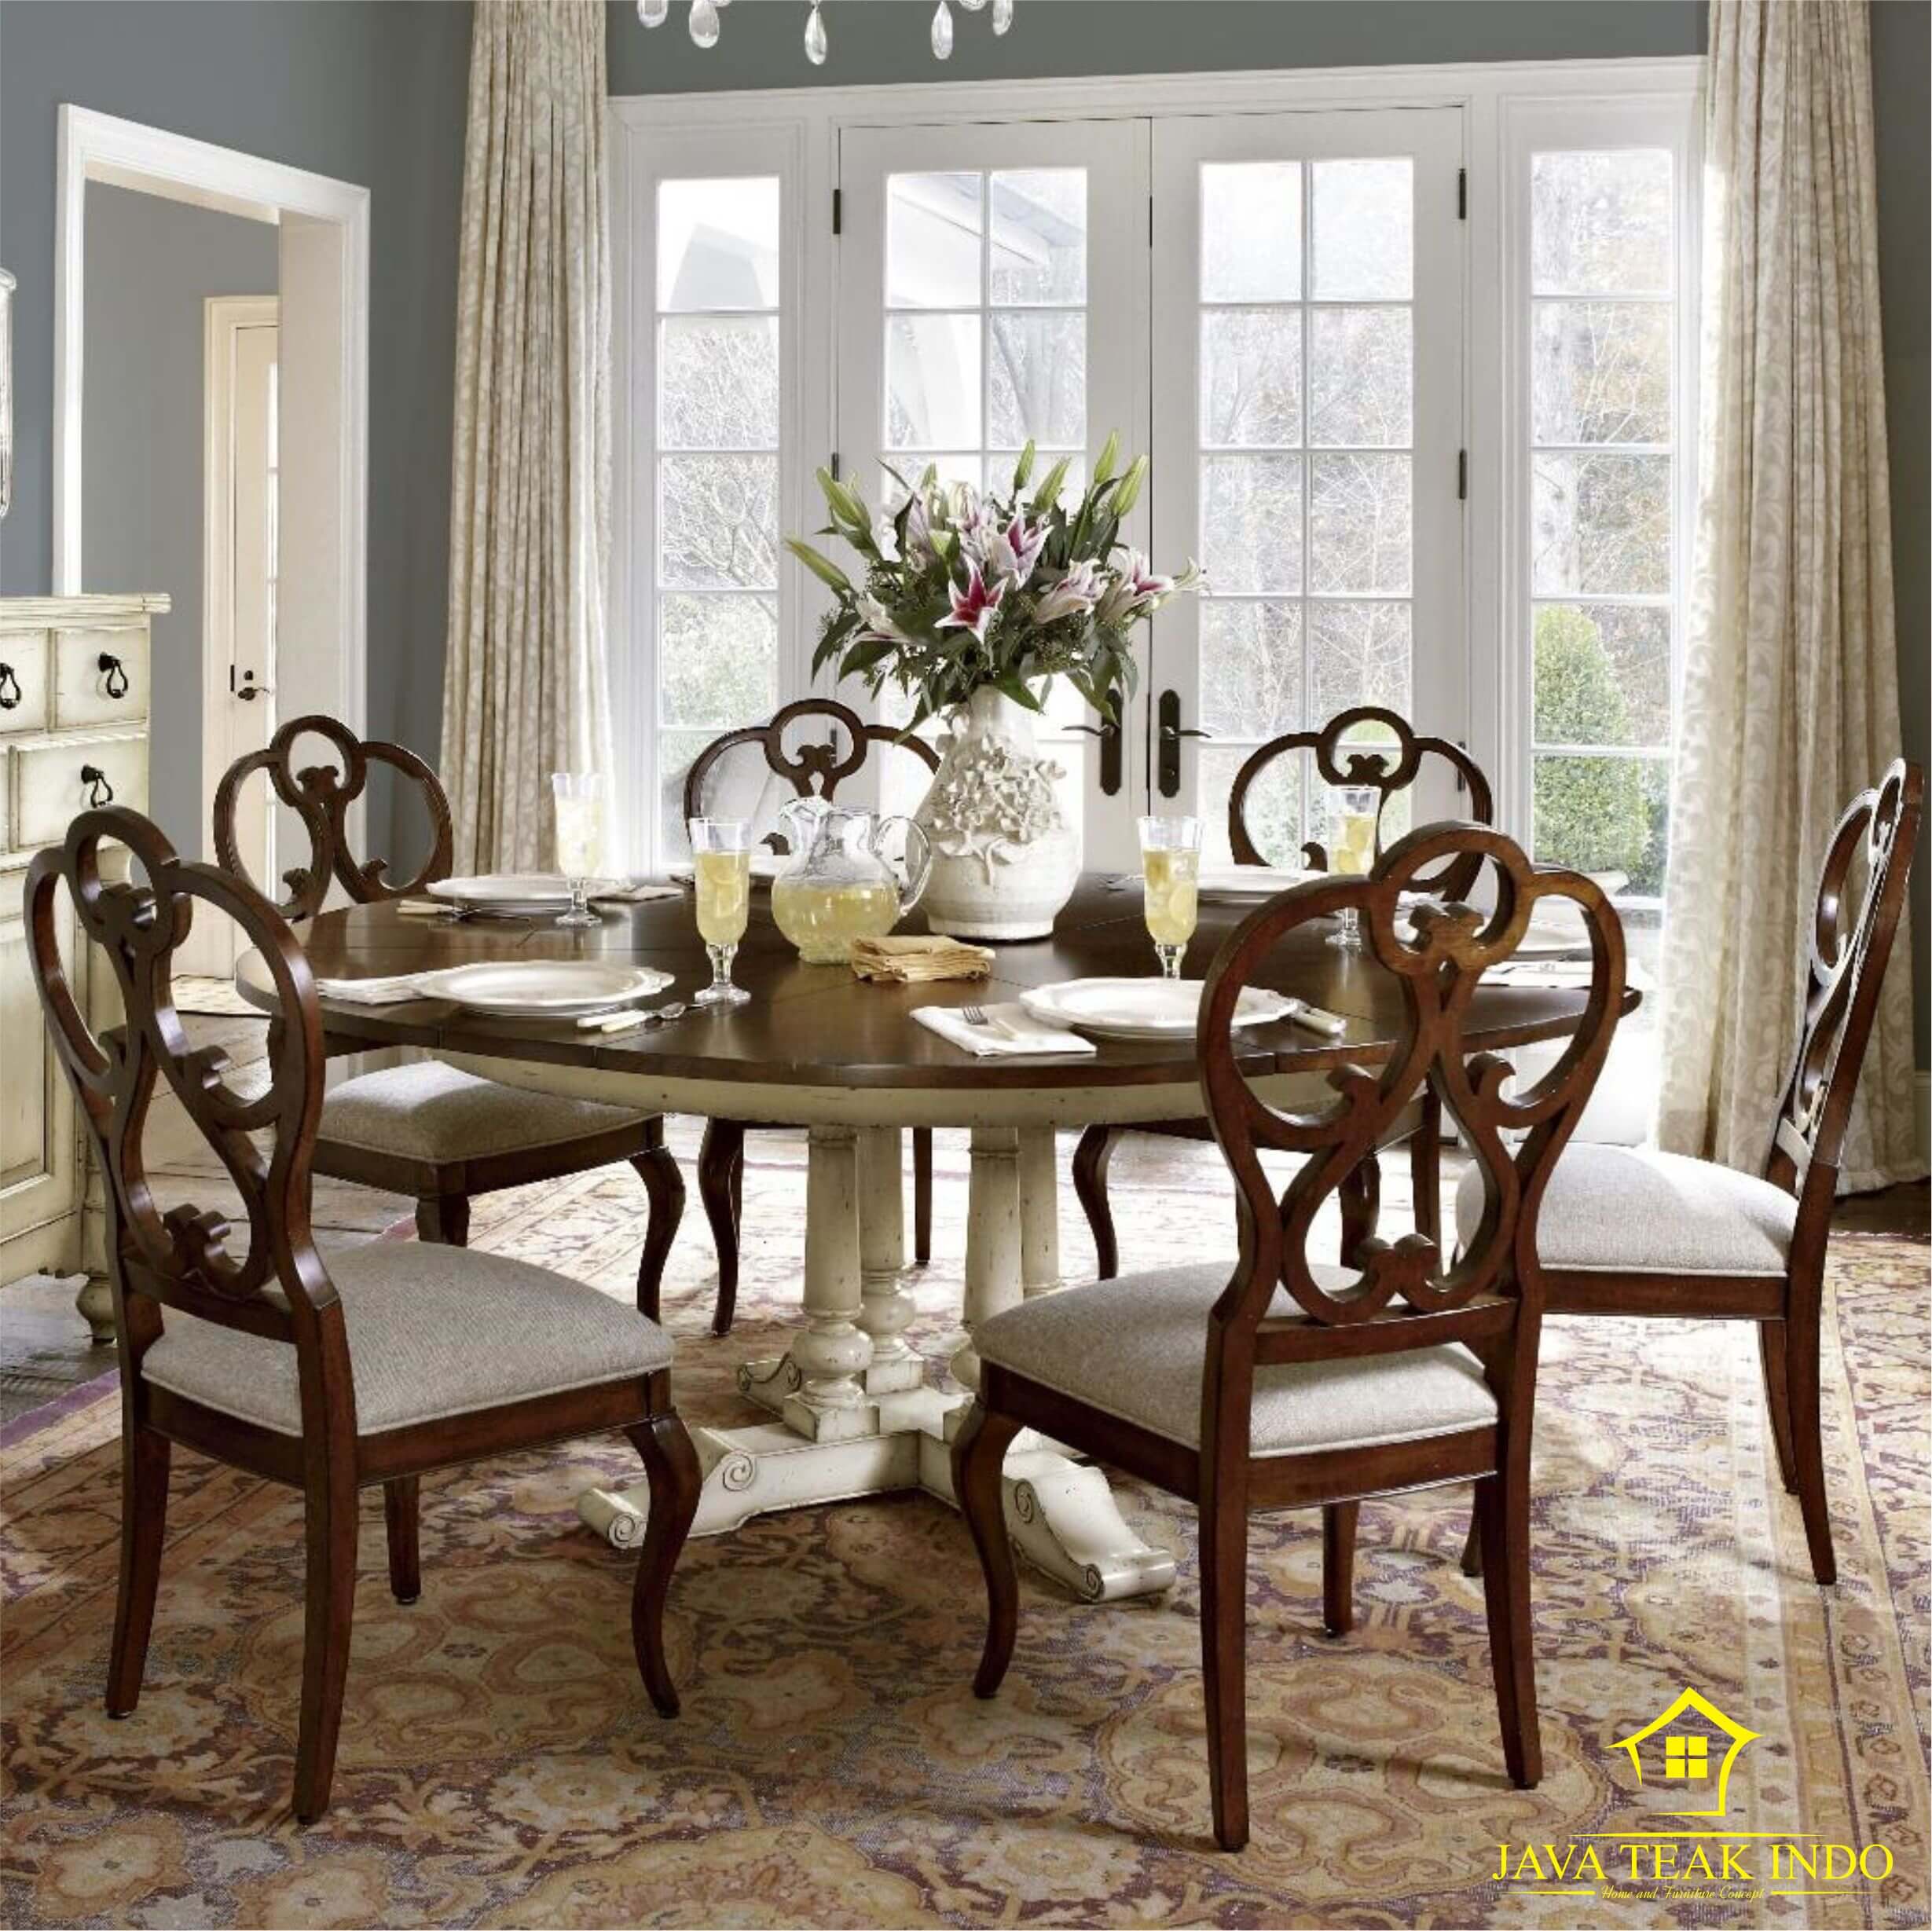 Classic Dining Set Victor Javateakindo, Classic Dining Room Table And Chairs